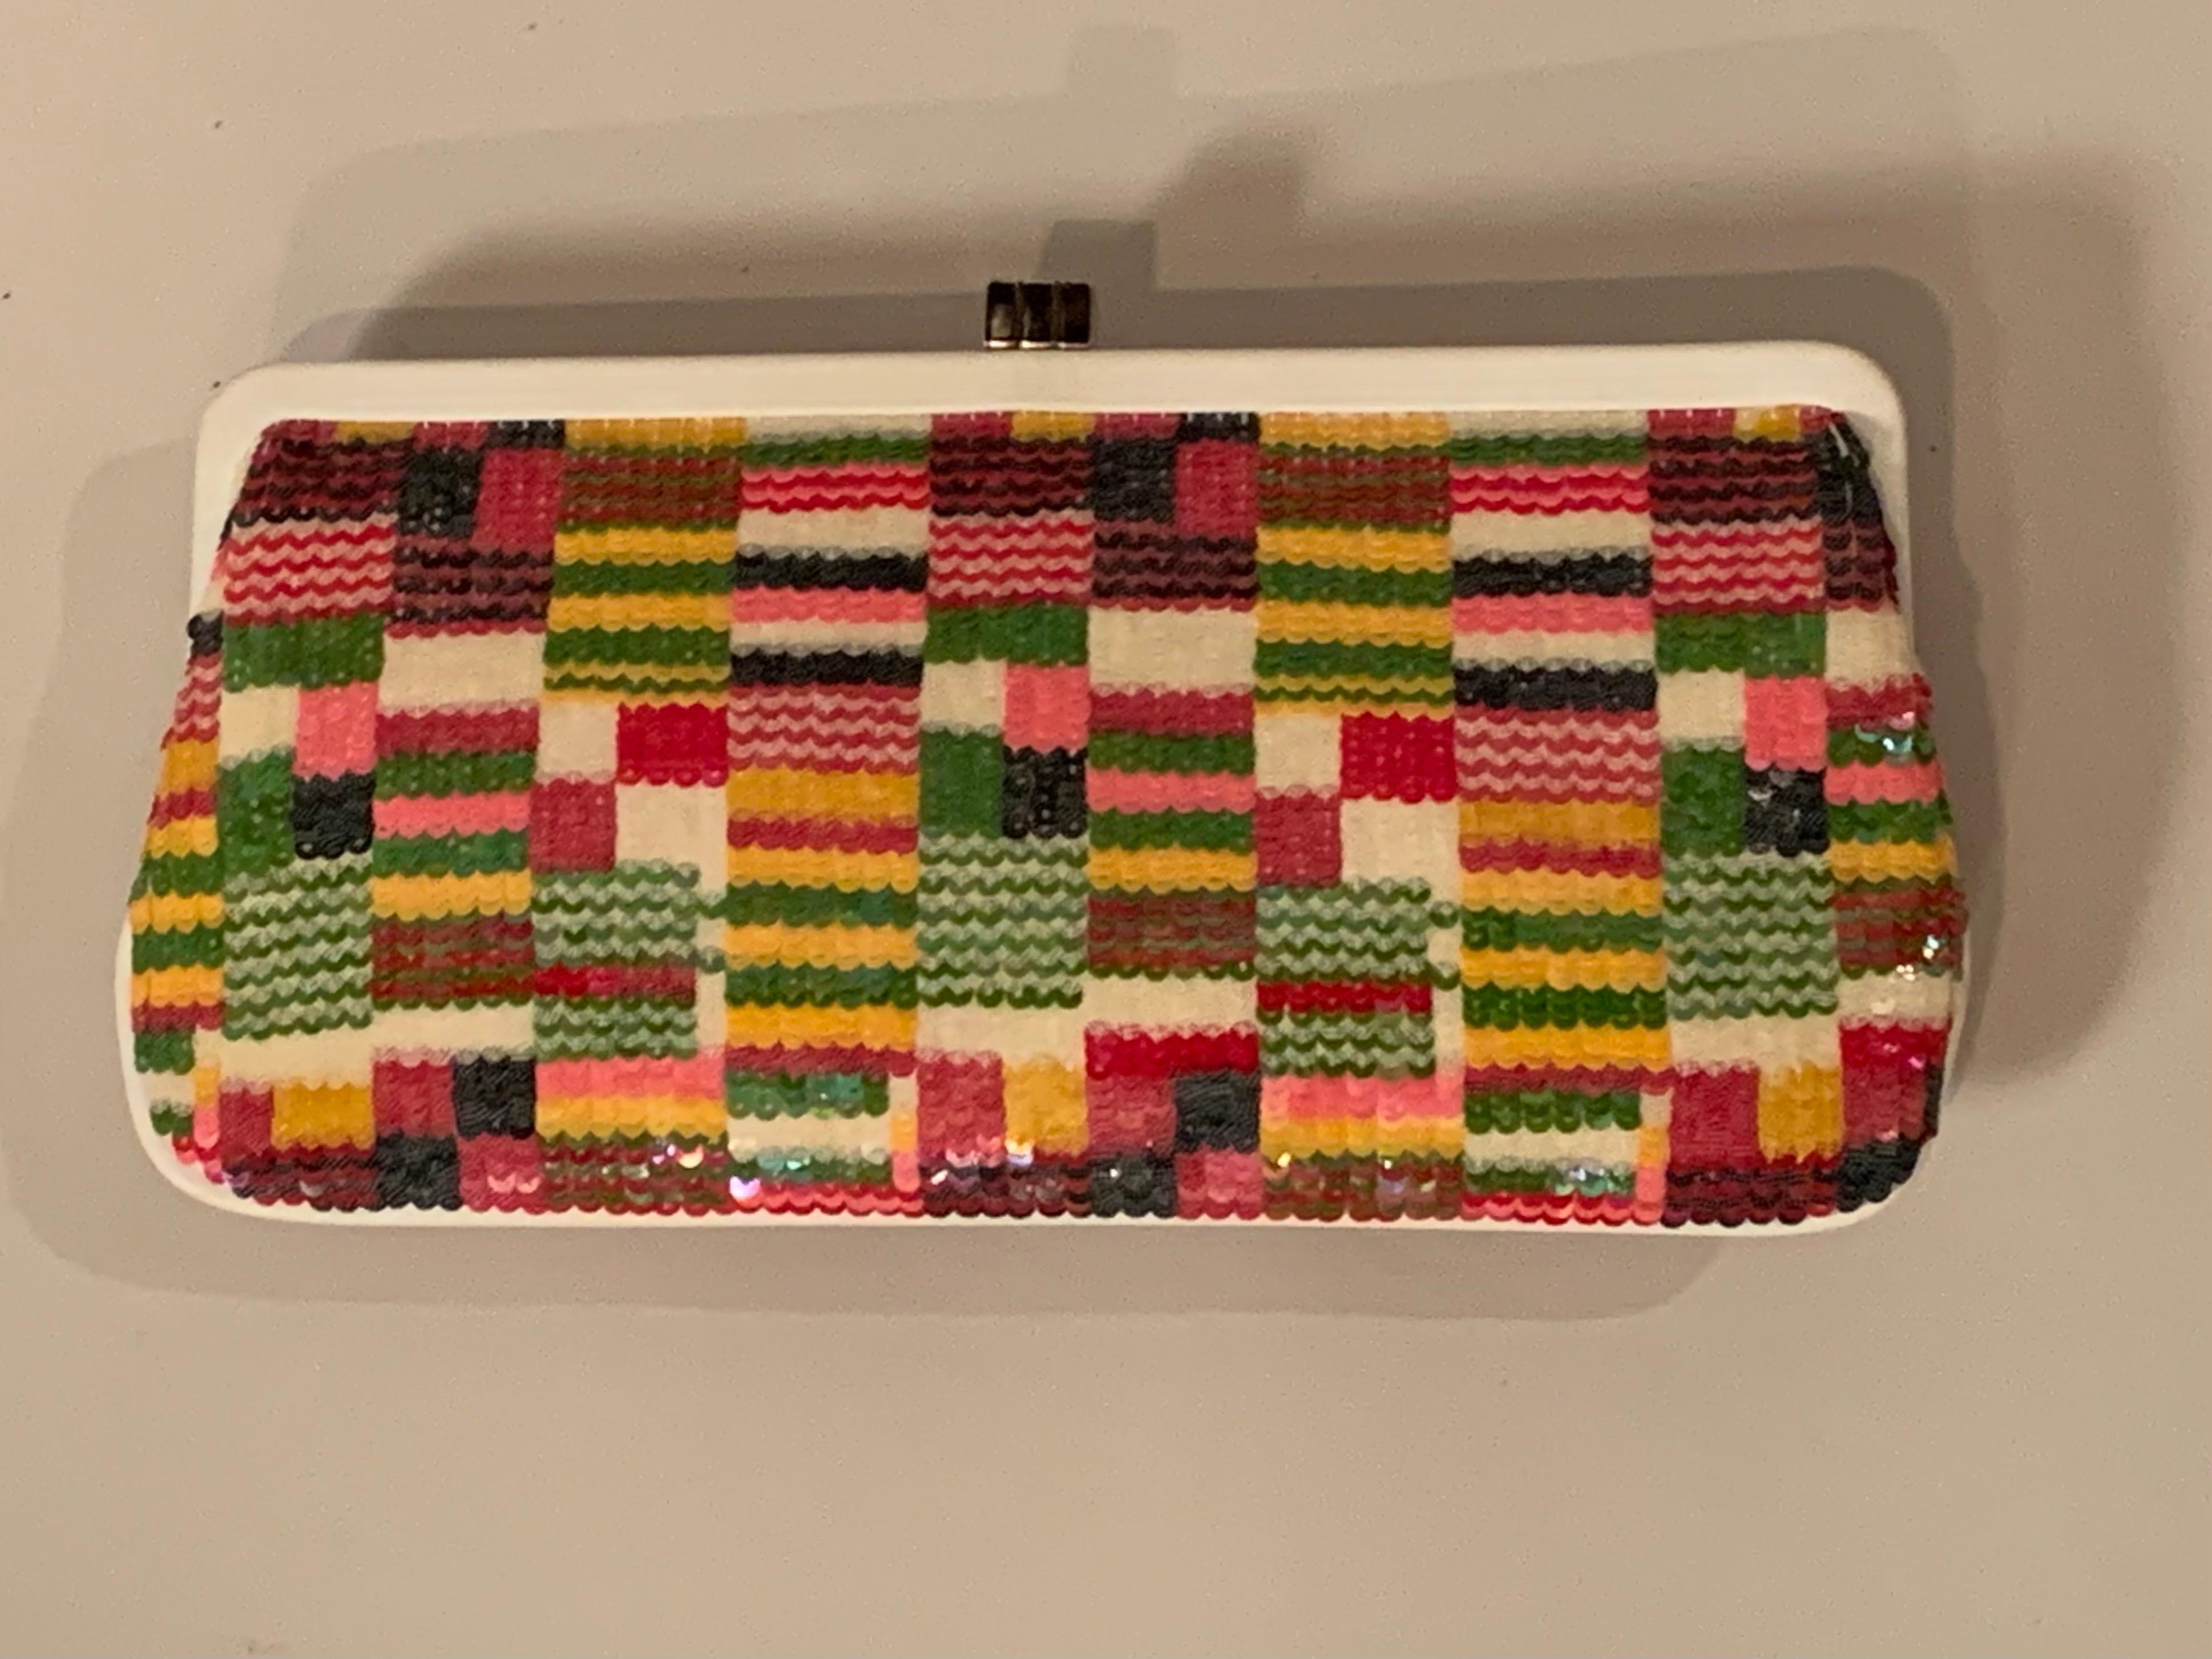 Women's Lambertson Truex Leather and Multi Color Sequin Clutch Bag For Sale